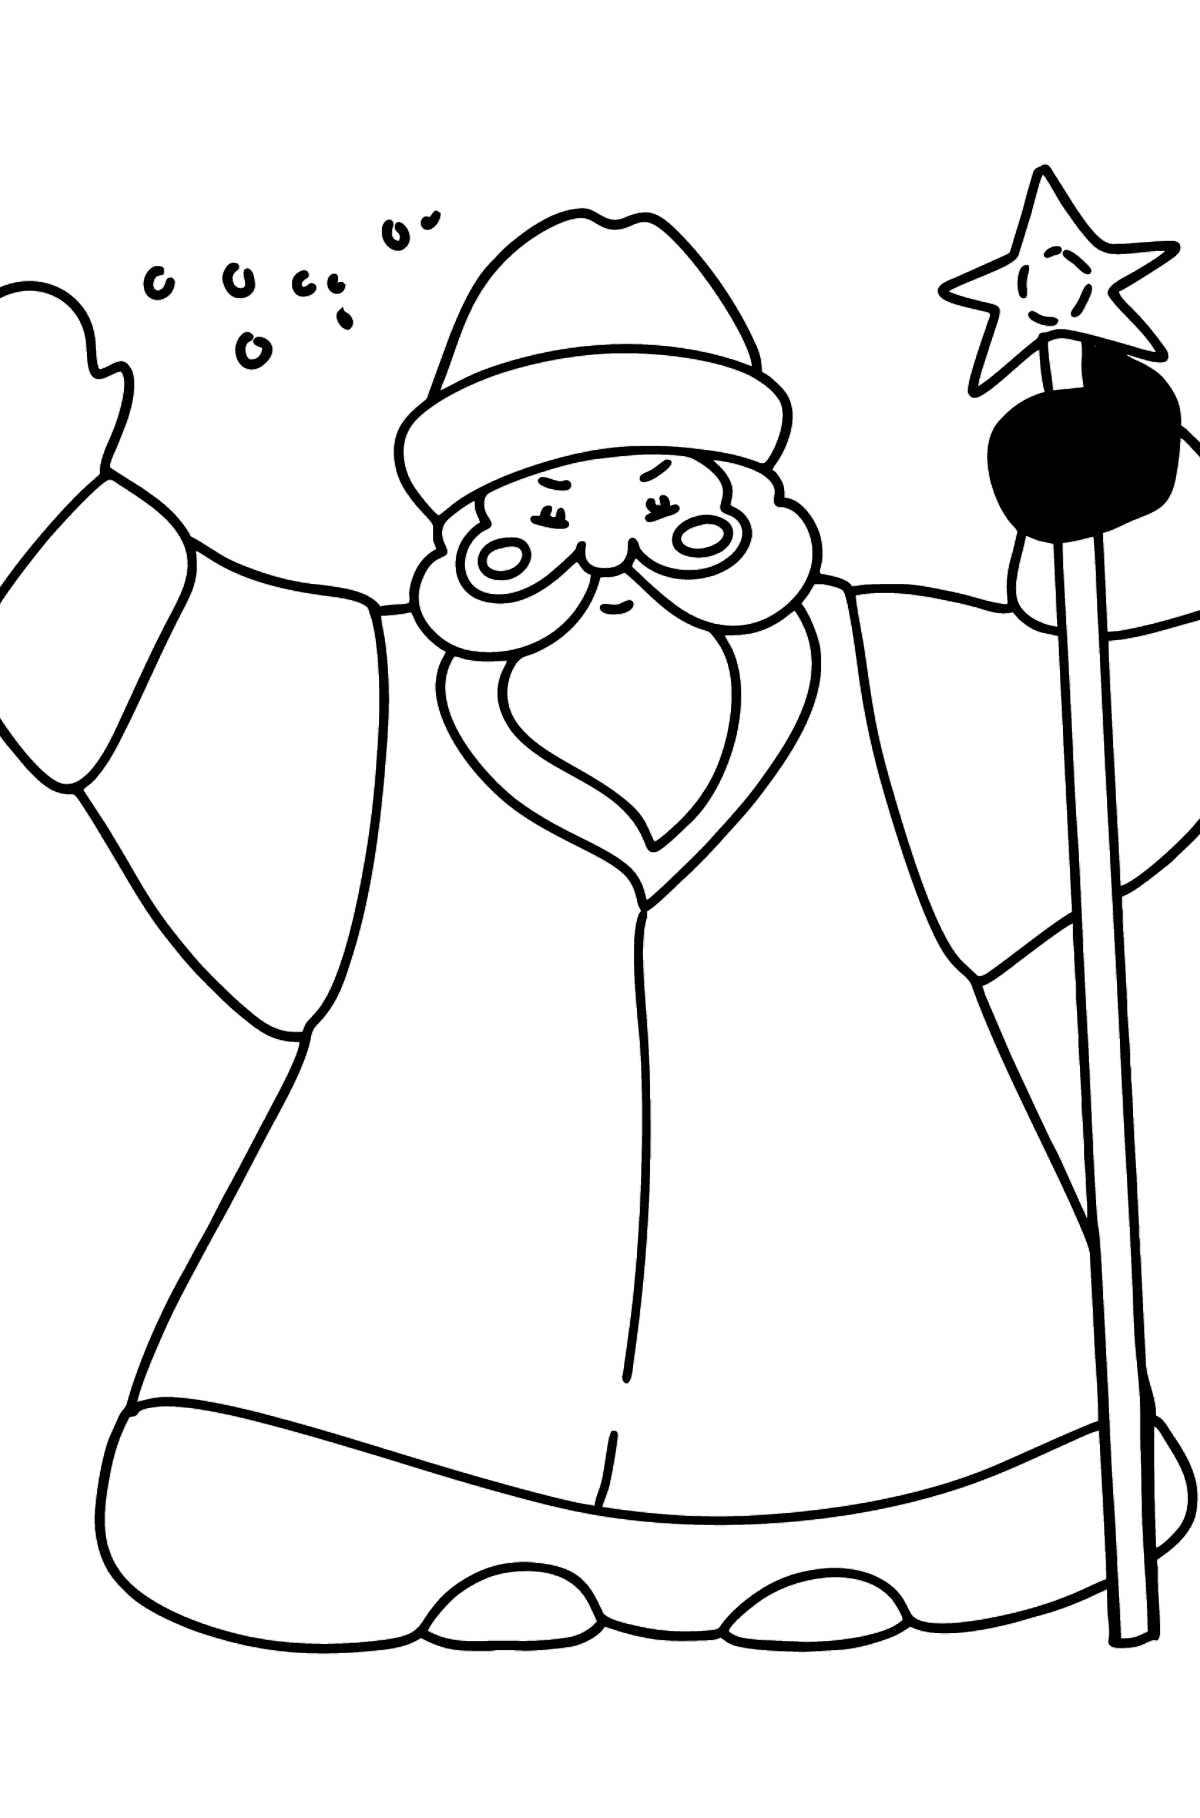 Father Frost coloring page - Coloring Pages for Kids